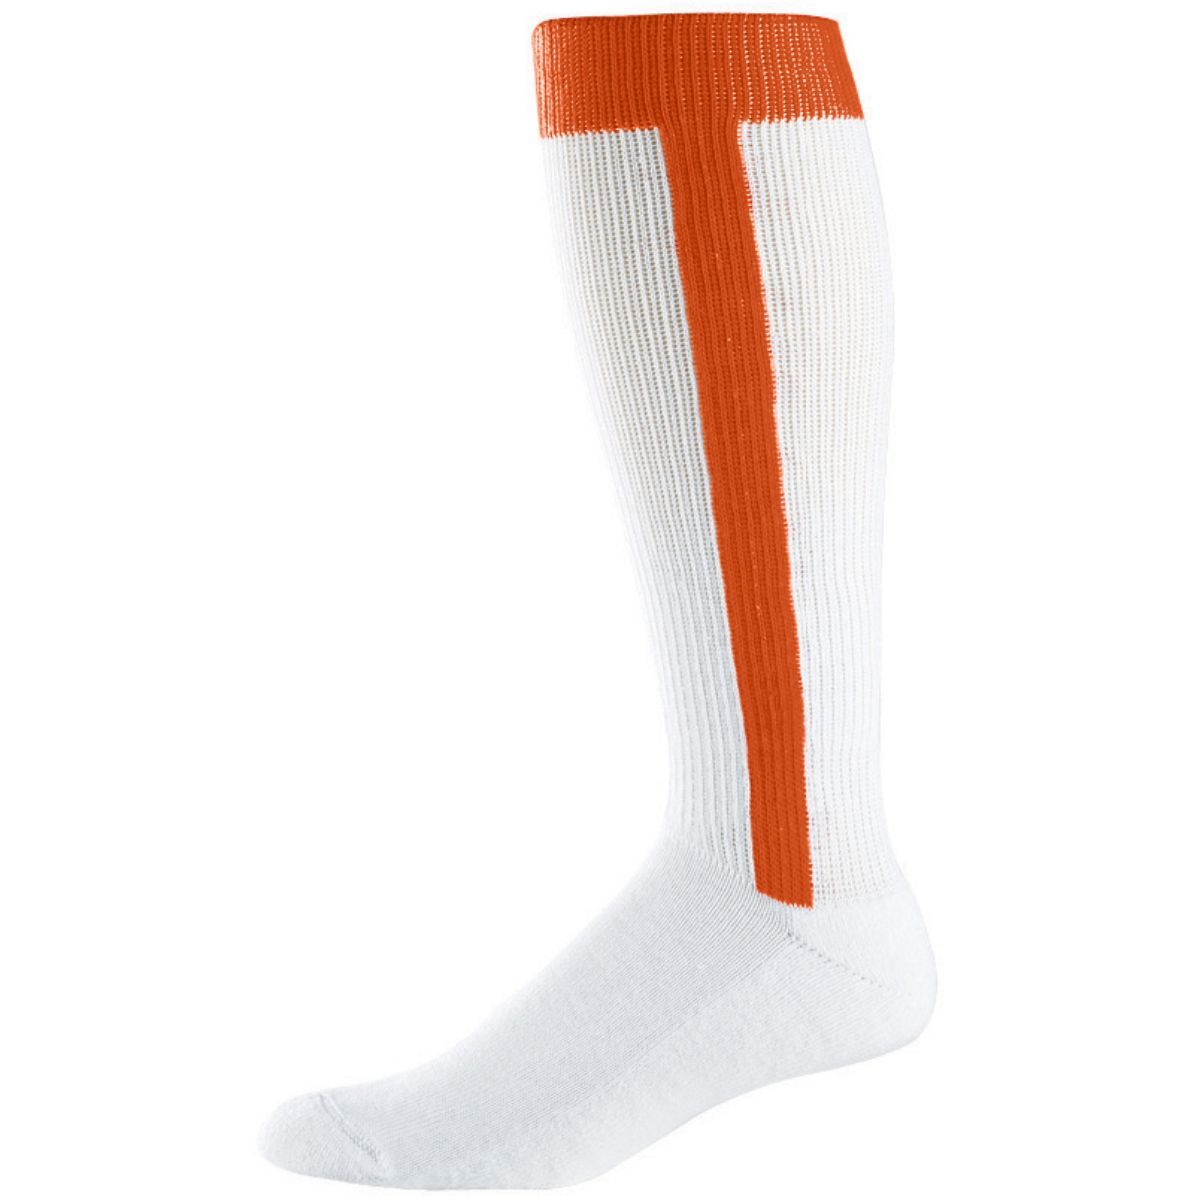 Augusta Sportswear Baseball Stirrup Sock in Orange  -Part of the Accessories, Augusta-Products, Accessories-Socks, Baseball, All-Sports, All-Sports-1 product lines at KanaleyCreations.com